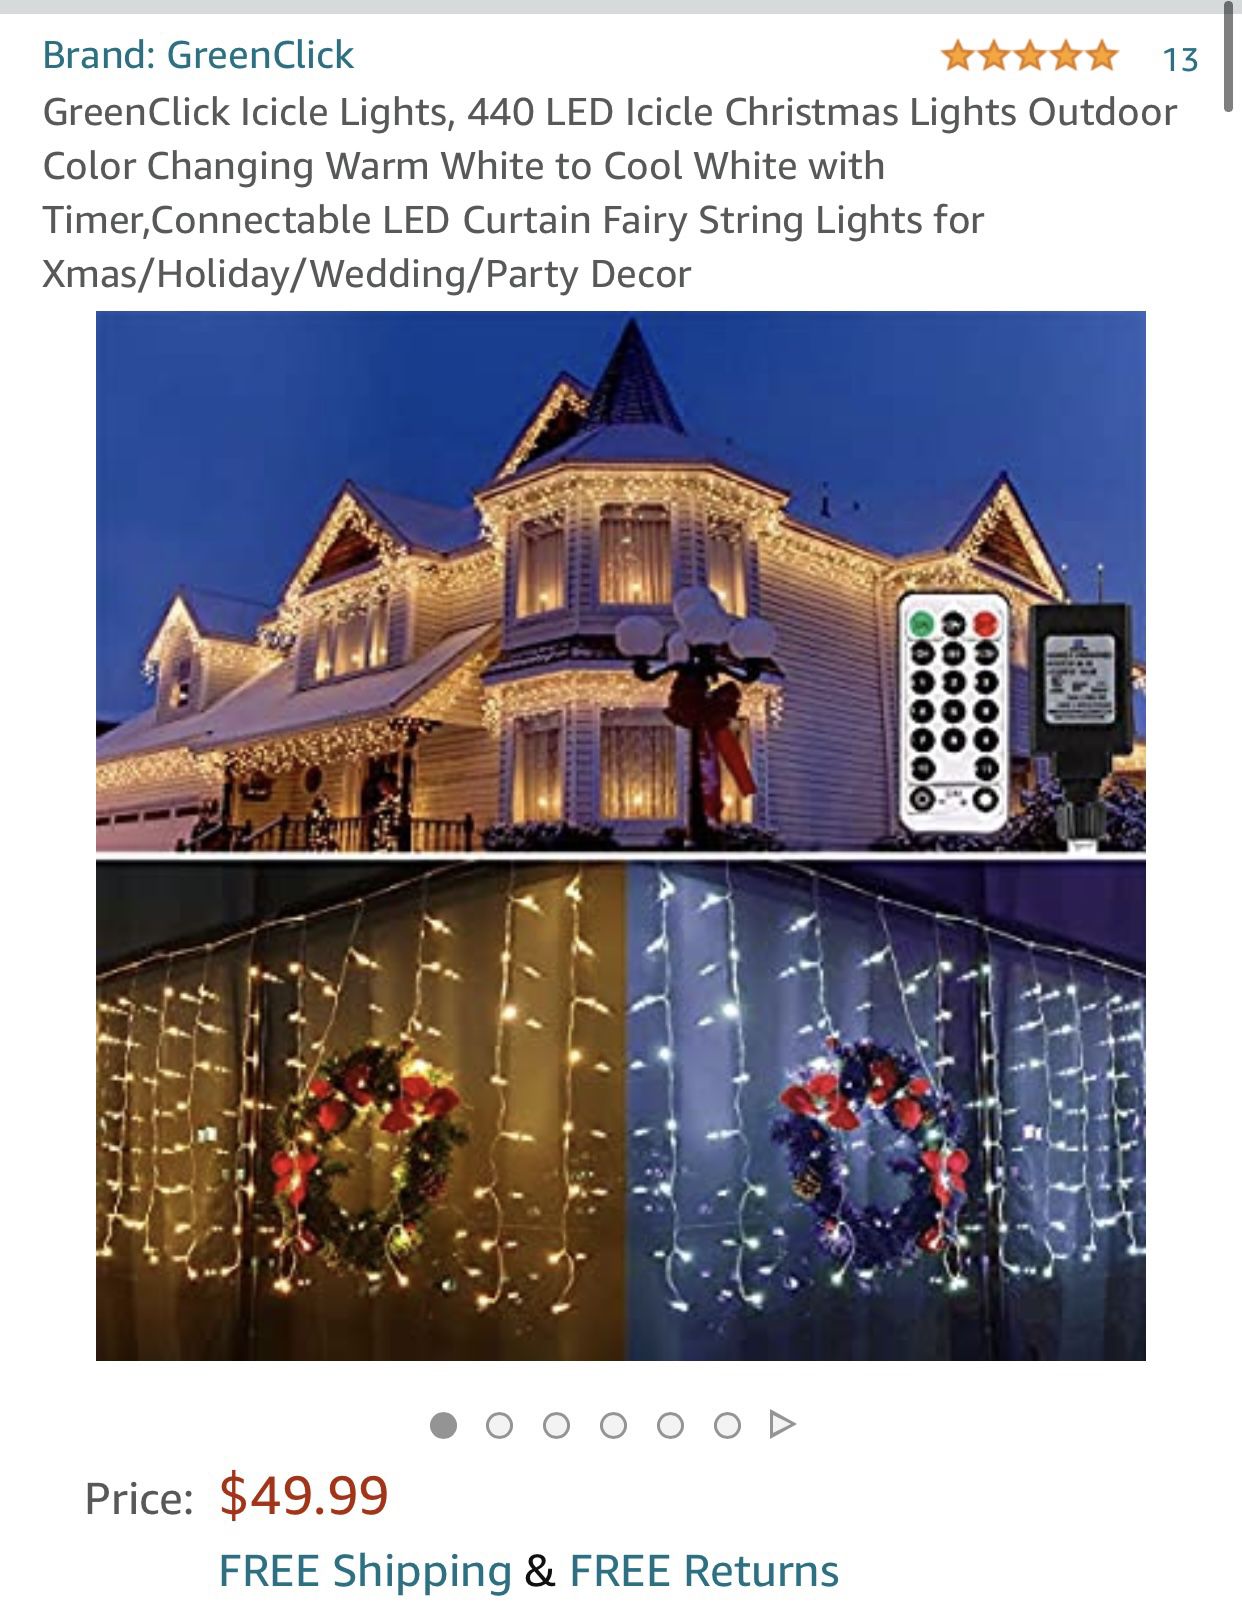 440 LED Icicle Christmas Lights Outdoor Color Changing Warm White to Cool White